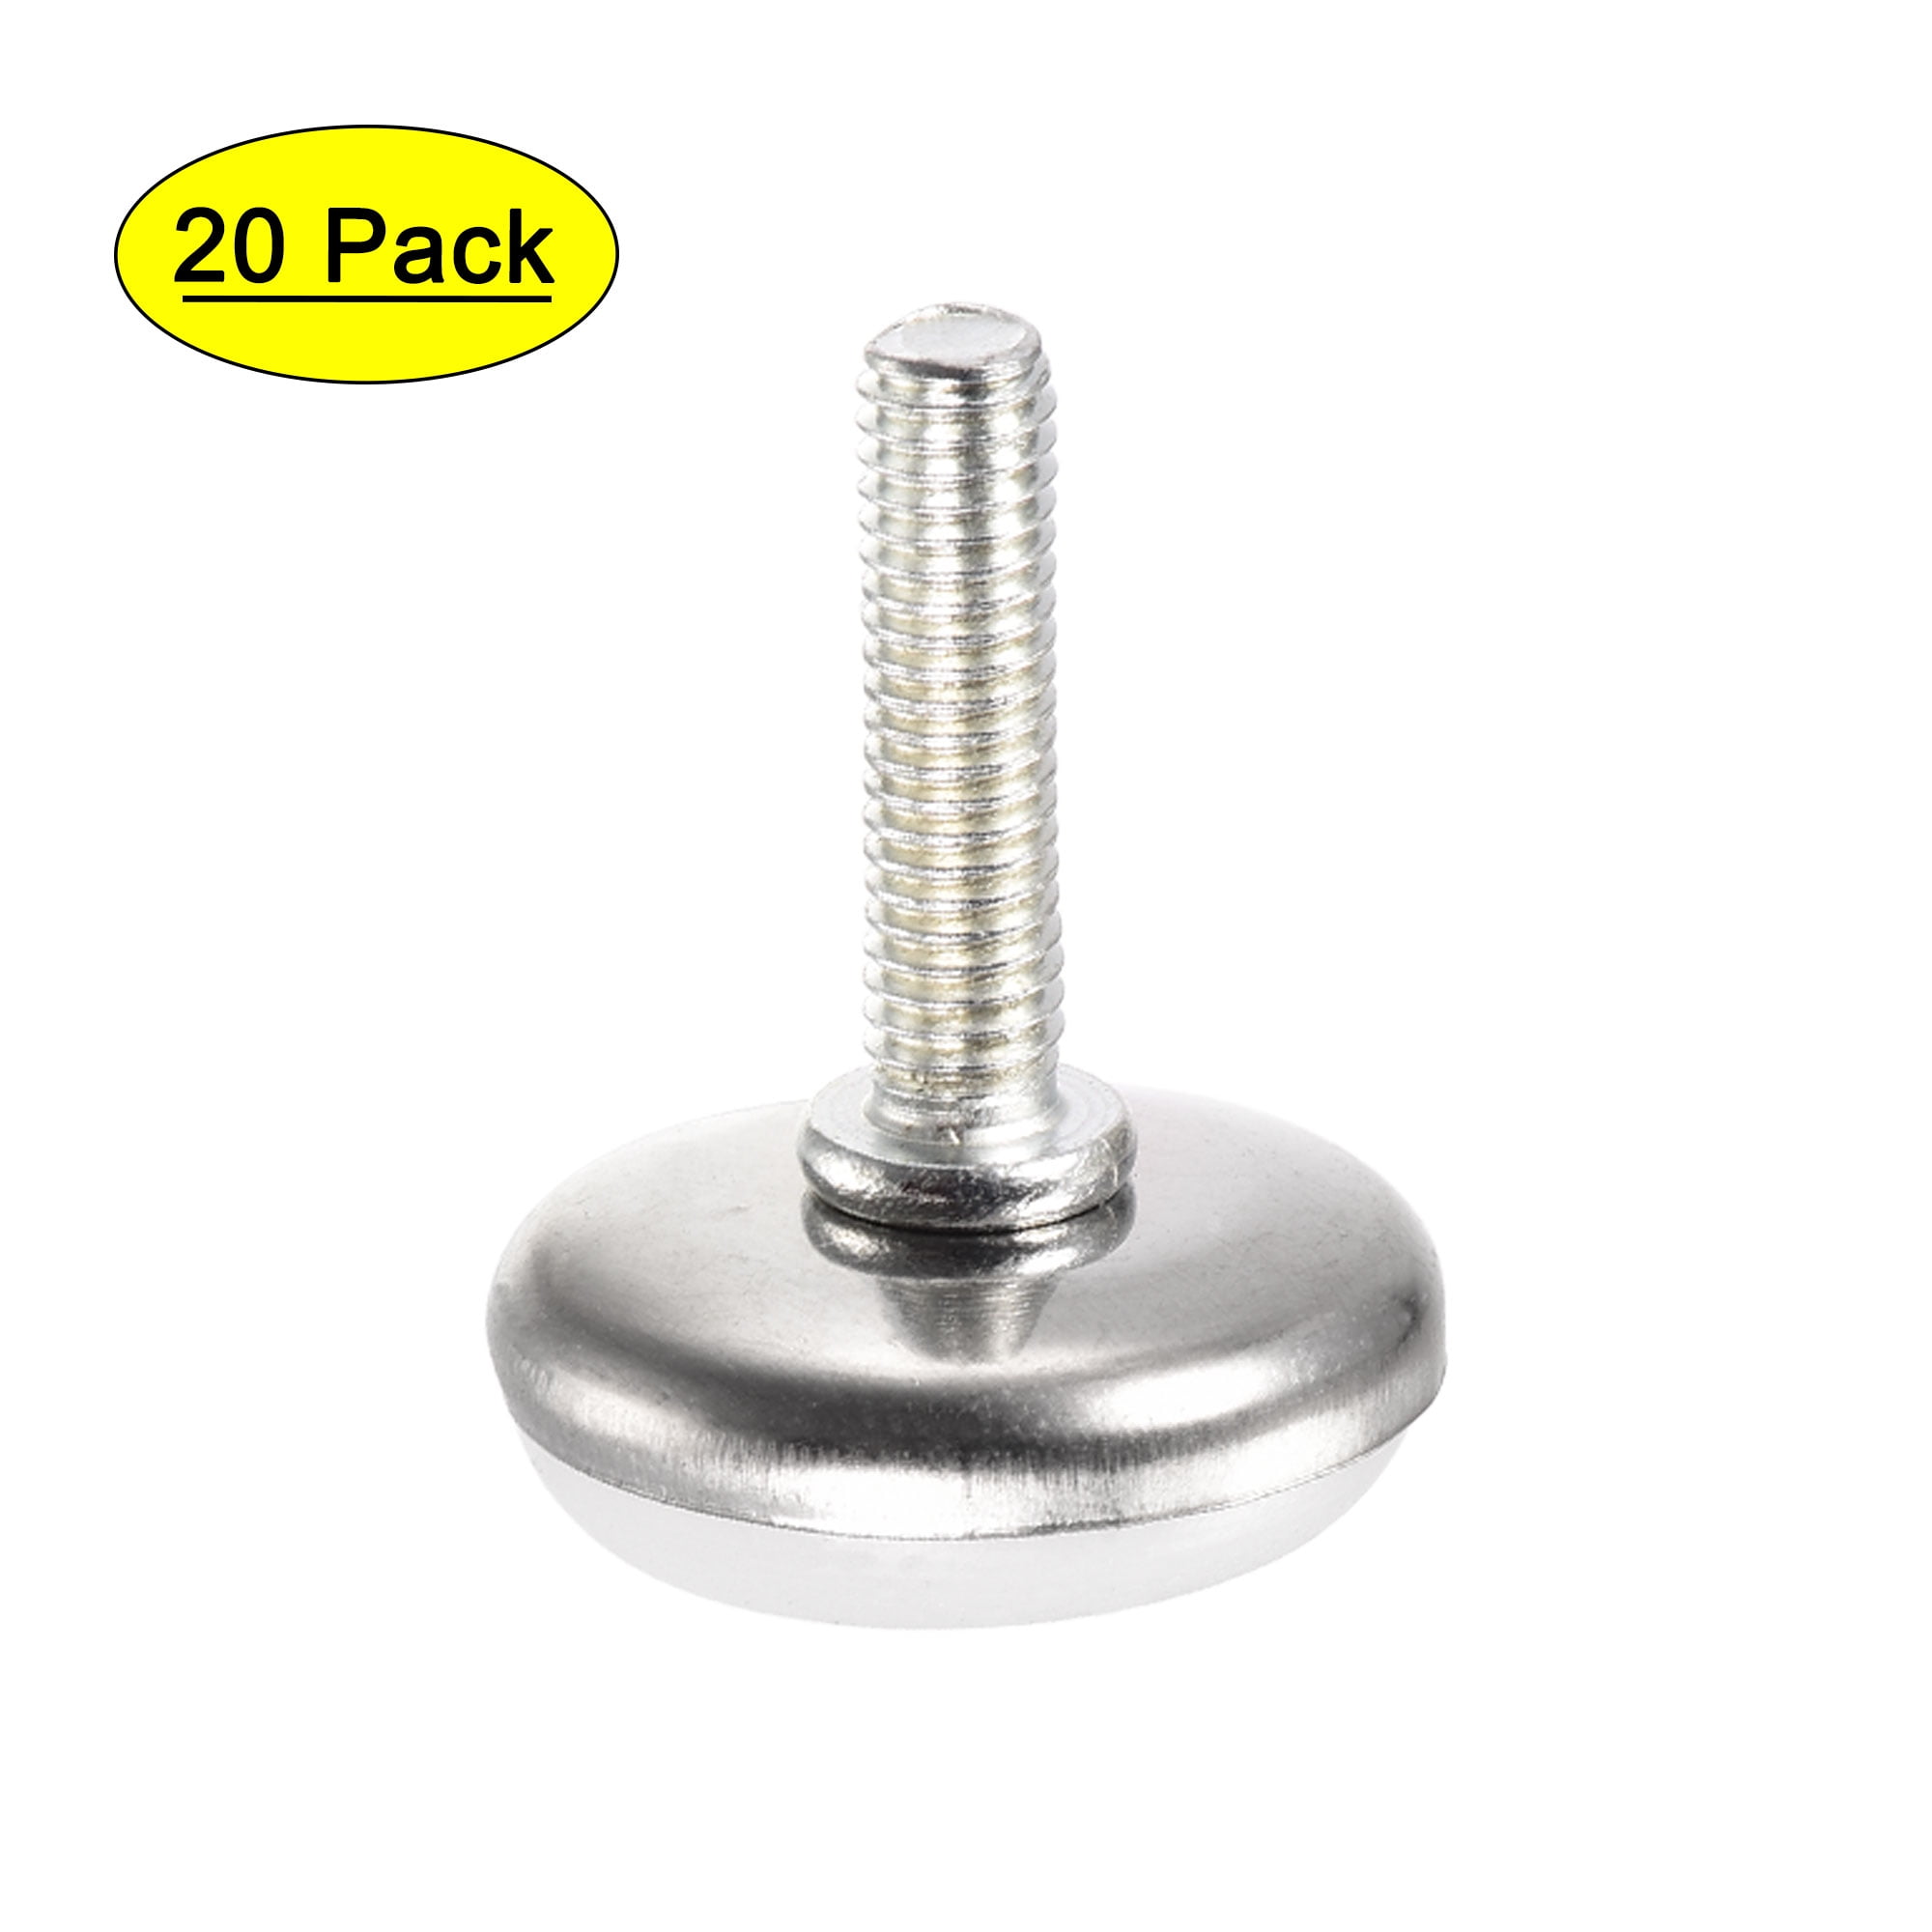 100pc 1/4" x 25mm Screw On Type Furniture Glide Leveling Foot Adjuster Black US 